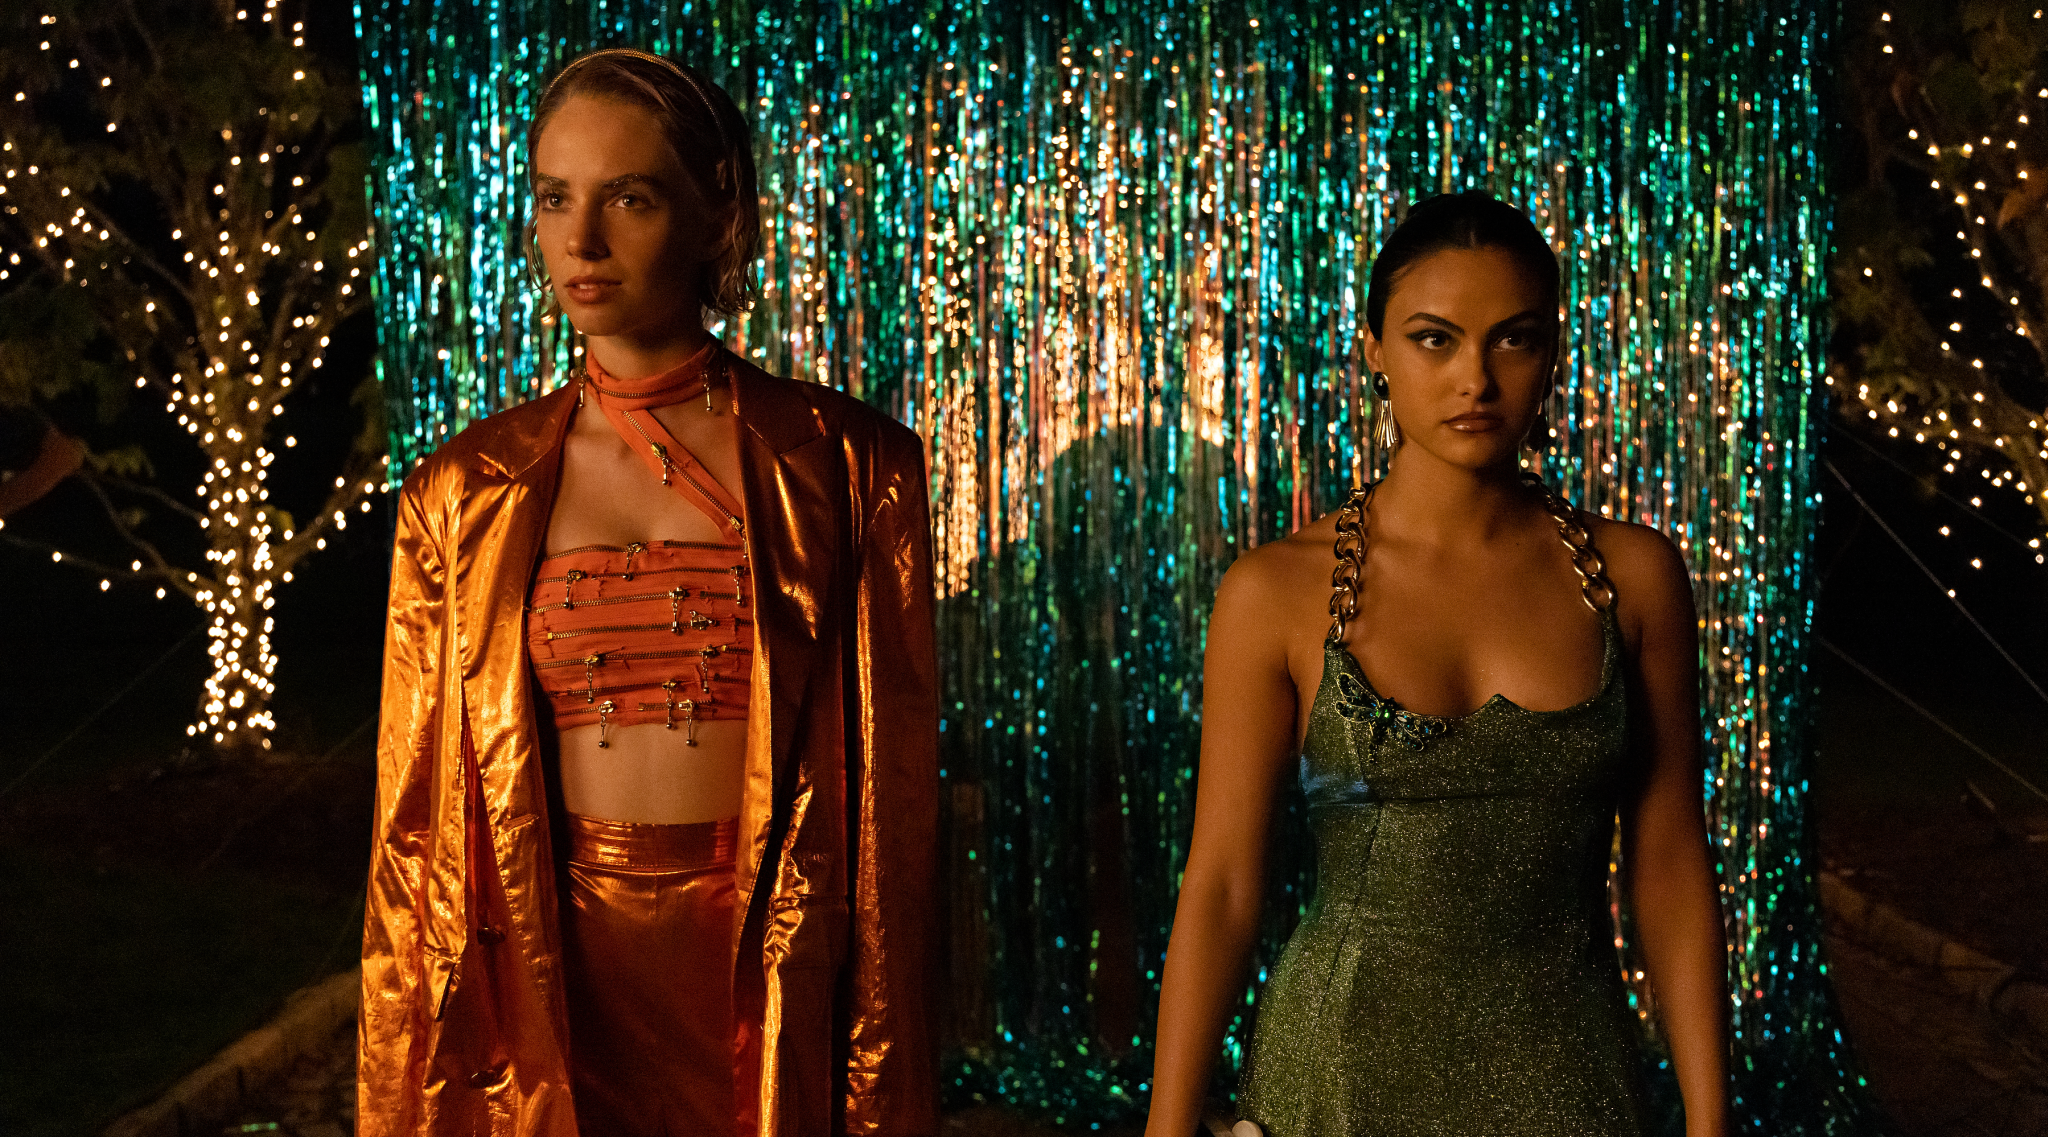 Maya Hawke and Camila Mendes 'Do Revenge' in Trailer for Candy-Coated Dark Comedy